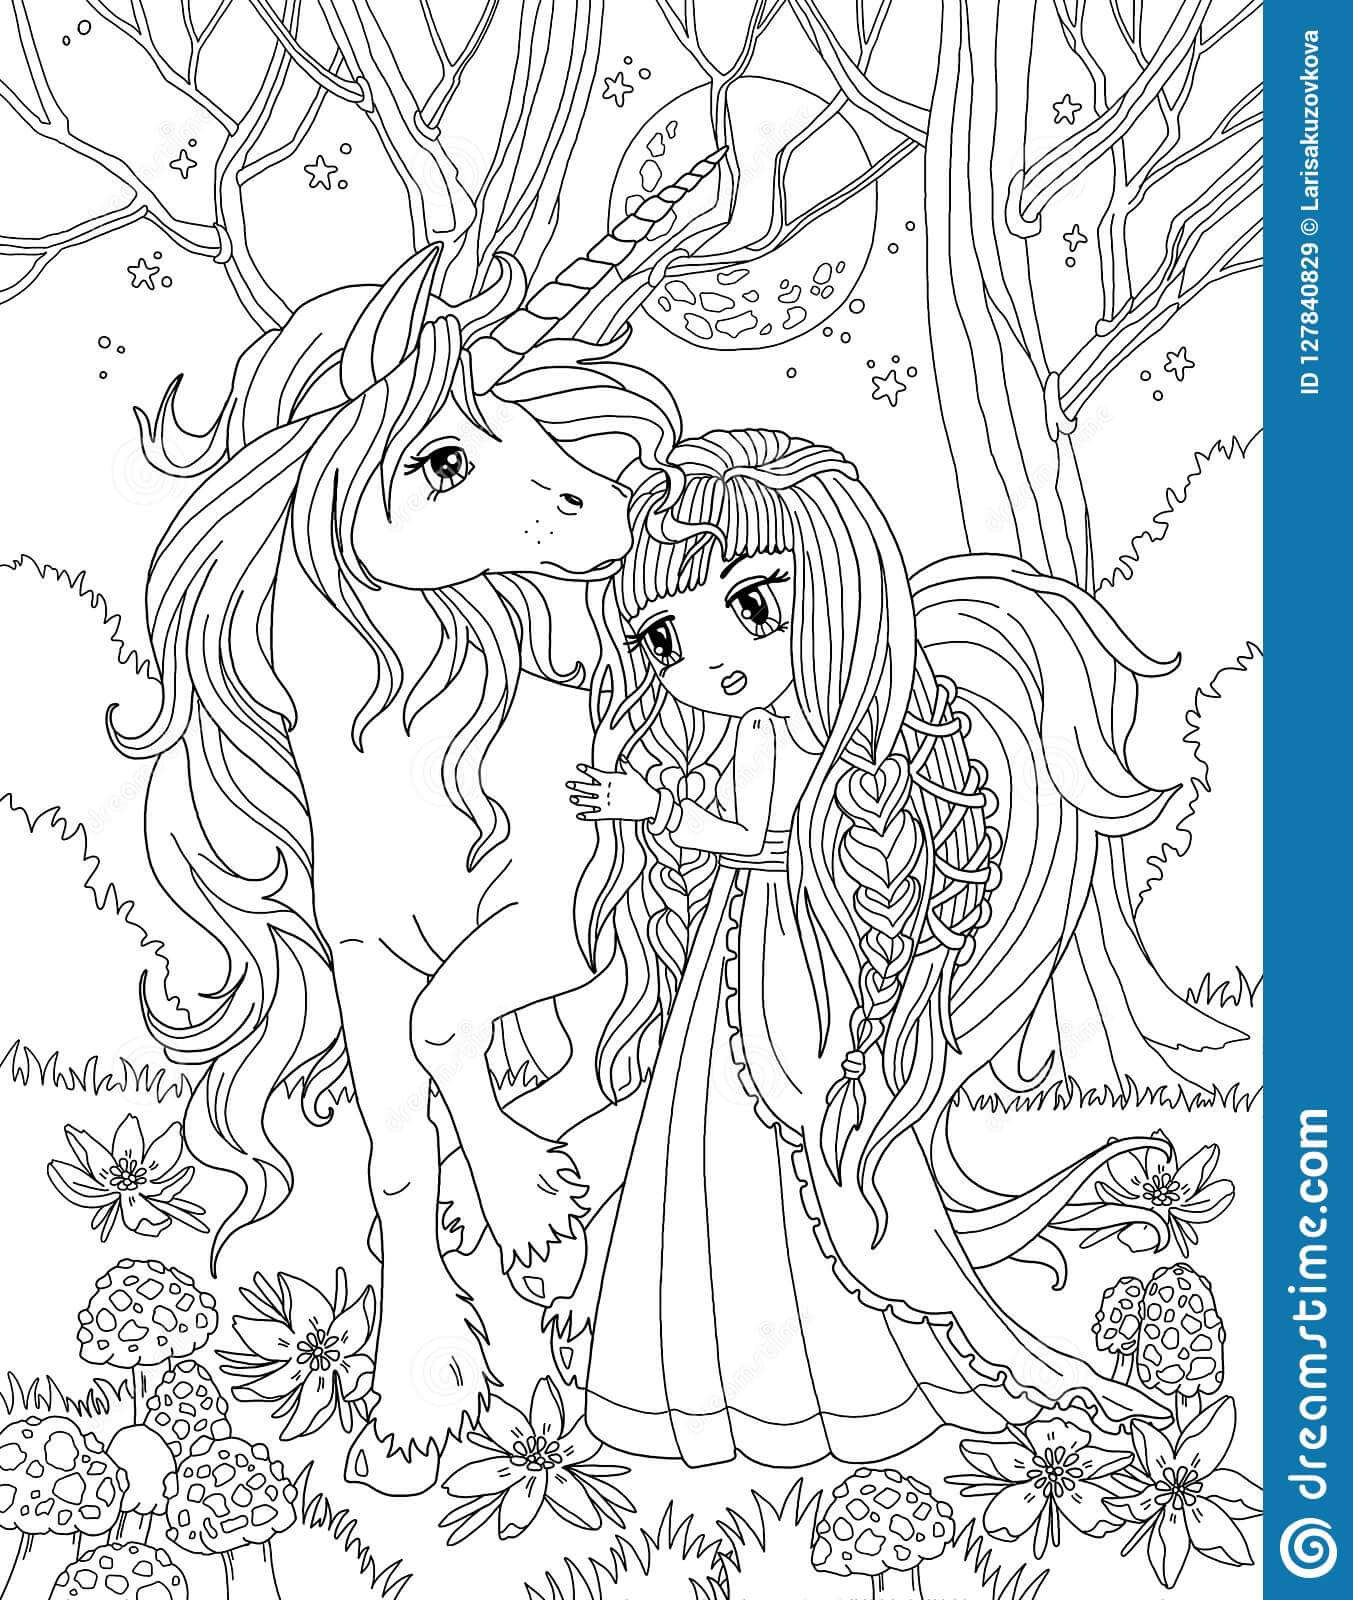 20 Printable Unicorn Coloring Pages for Adults   Happier Human